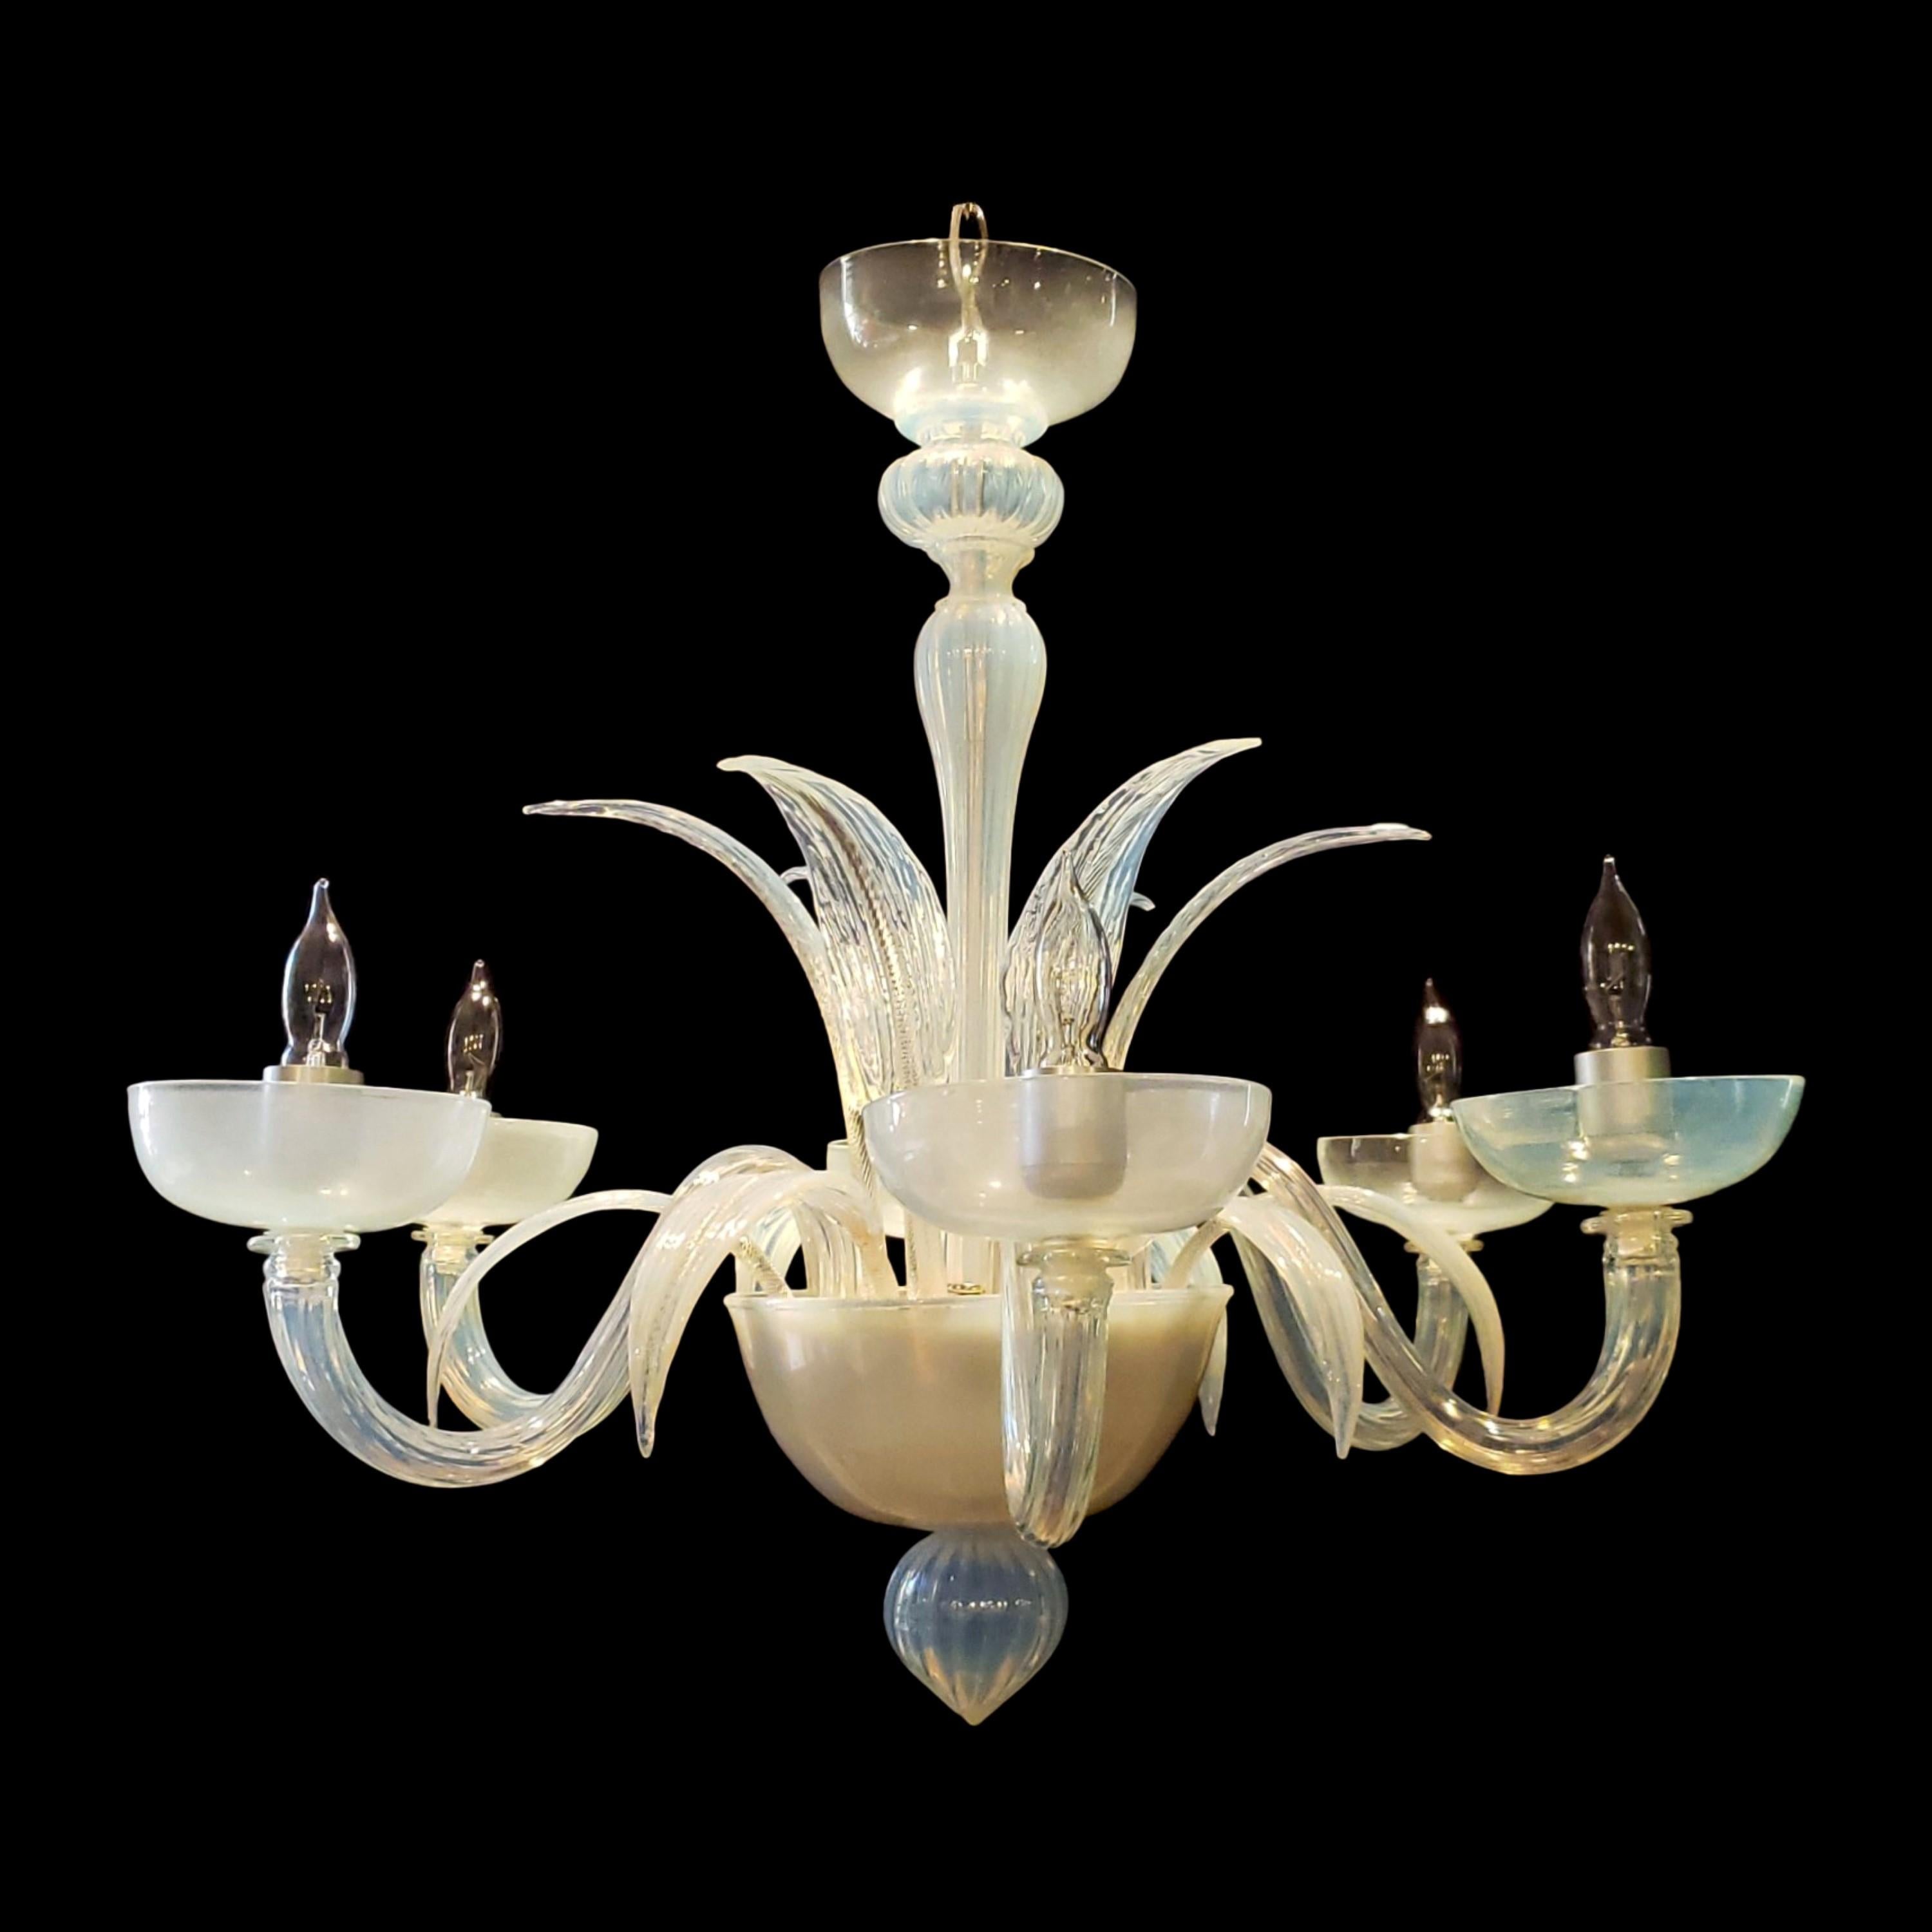 Hand made Murano opaline chandelier with six S shaped arms and up and down leaves. This comes rewired and ready to install. Ships disassembled. Cleaned and restored. Please note, this item is located in our Scranton, PA location.